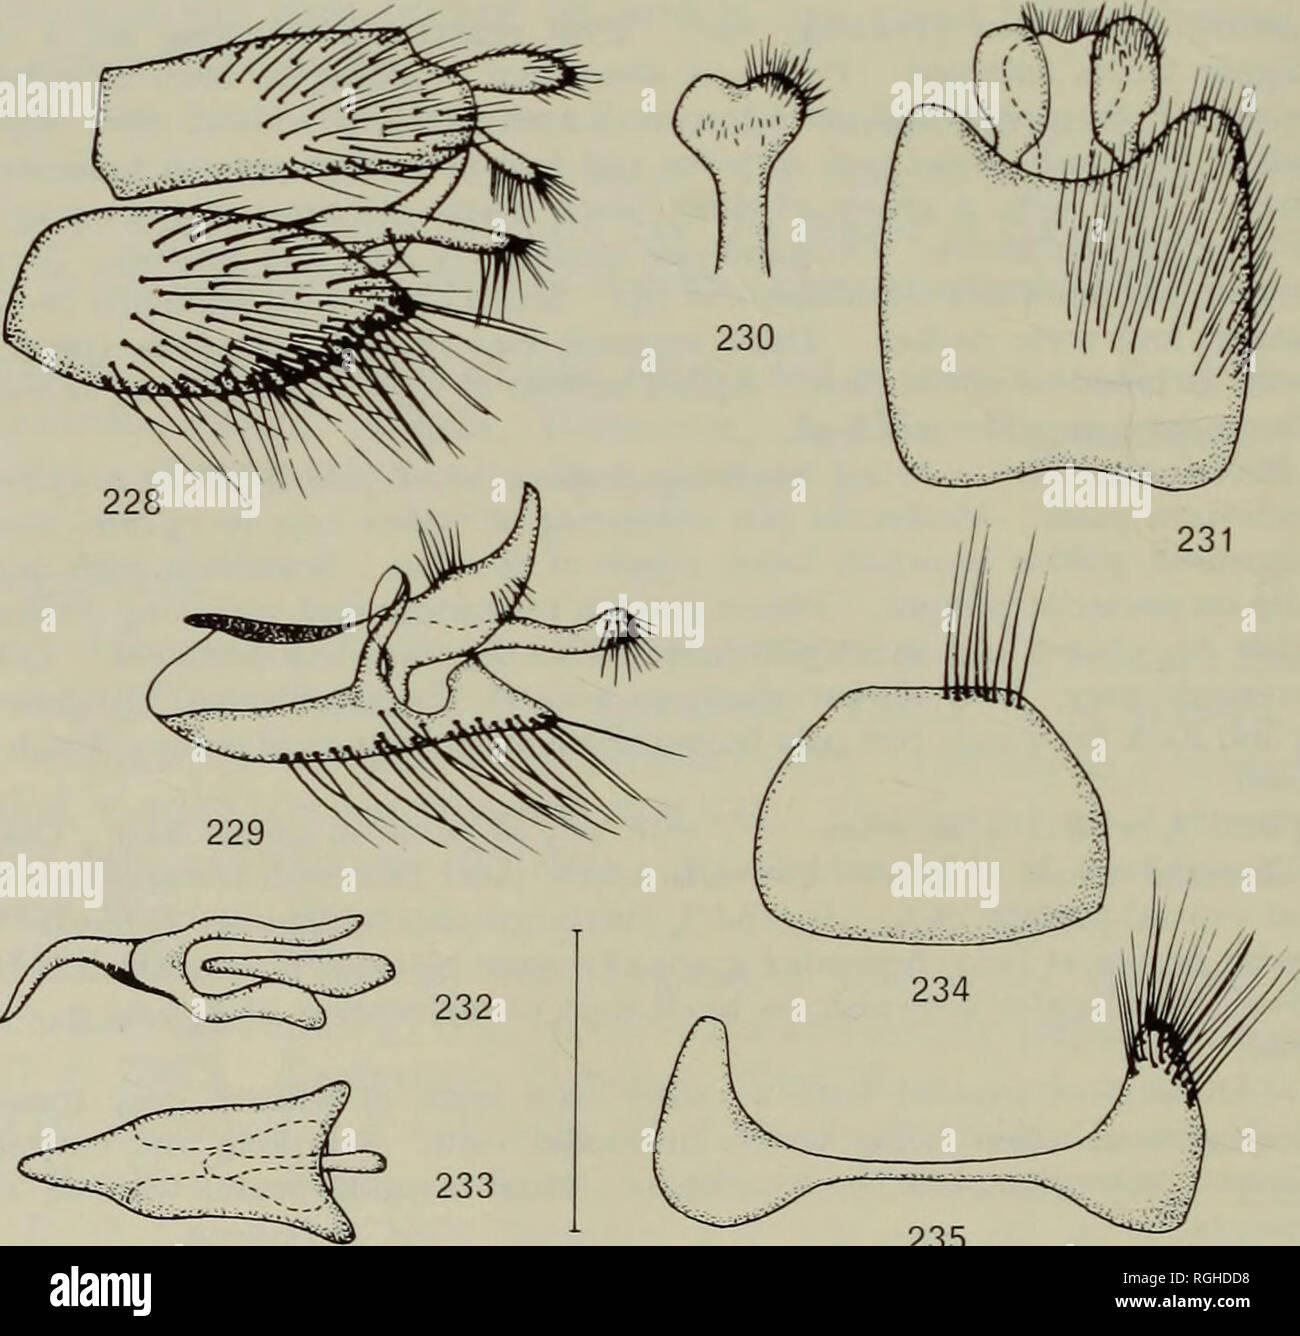 . Bulletin of the British Museum (Natural History) Entomology. 268 L. LYNEBORG short and broad. Phallus in lateral view (Text-fig. 232) short and rather suddenly curved for less than 90 degrees; in dorsal view (Text-fig. 233) of almost the same shape as in nuba. The same is true of the dorsal, ventral and ejaculatory apodemes. Tergite 8: Text-fig. 235. Sternite 8 (Text-fig. 234) without incision on posterior margin. Total length 9-0-9-4 mm. 9. Unknown. Remarks. The species was described from two male specimens from Socotra. They are in the BMNH and are labelled 'Socotra, Homhil, 2500 ft., 26.1 Stock Photo